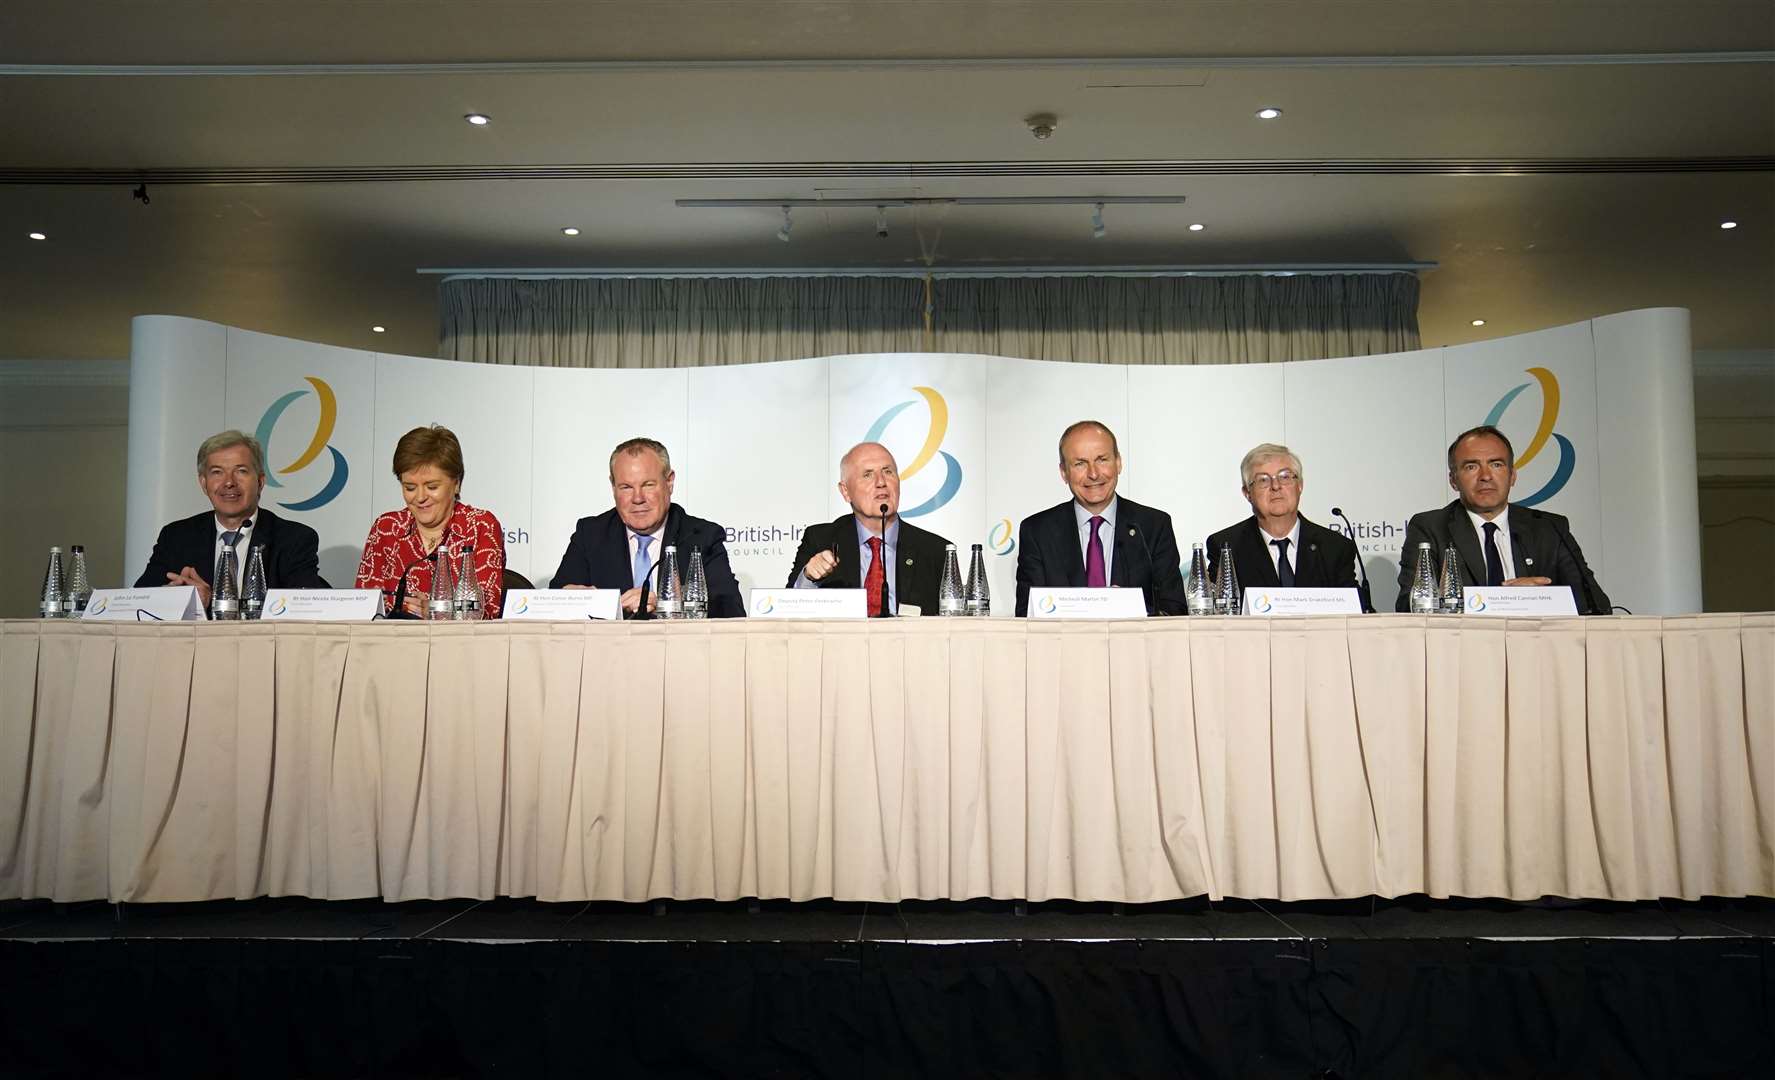 From left to right, Chief Minister of Jersey John Le Fondre, Scottish First Minister Nicola Sturgeon, Minister of State for Northern Ireland Conor Burns, Chief minister of Guernsey Peter Ferbrache, Taoiseach Michael Martin, First Minister of Wales Mark Drakeford and Chief Minister of the Isle of Man Alfred Cannon in Guernsey (Andrew Matthews/PA)